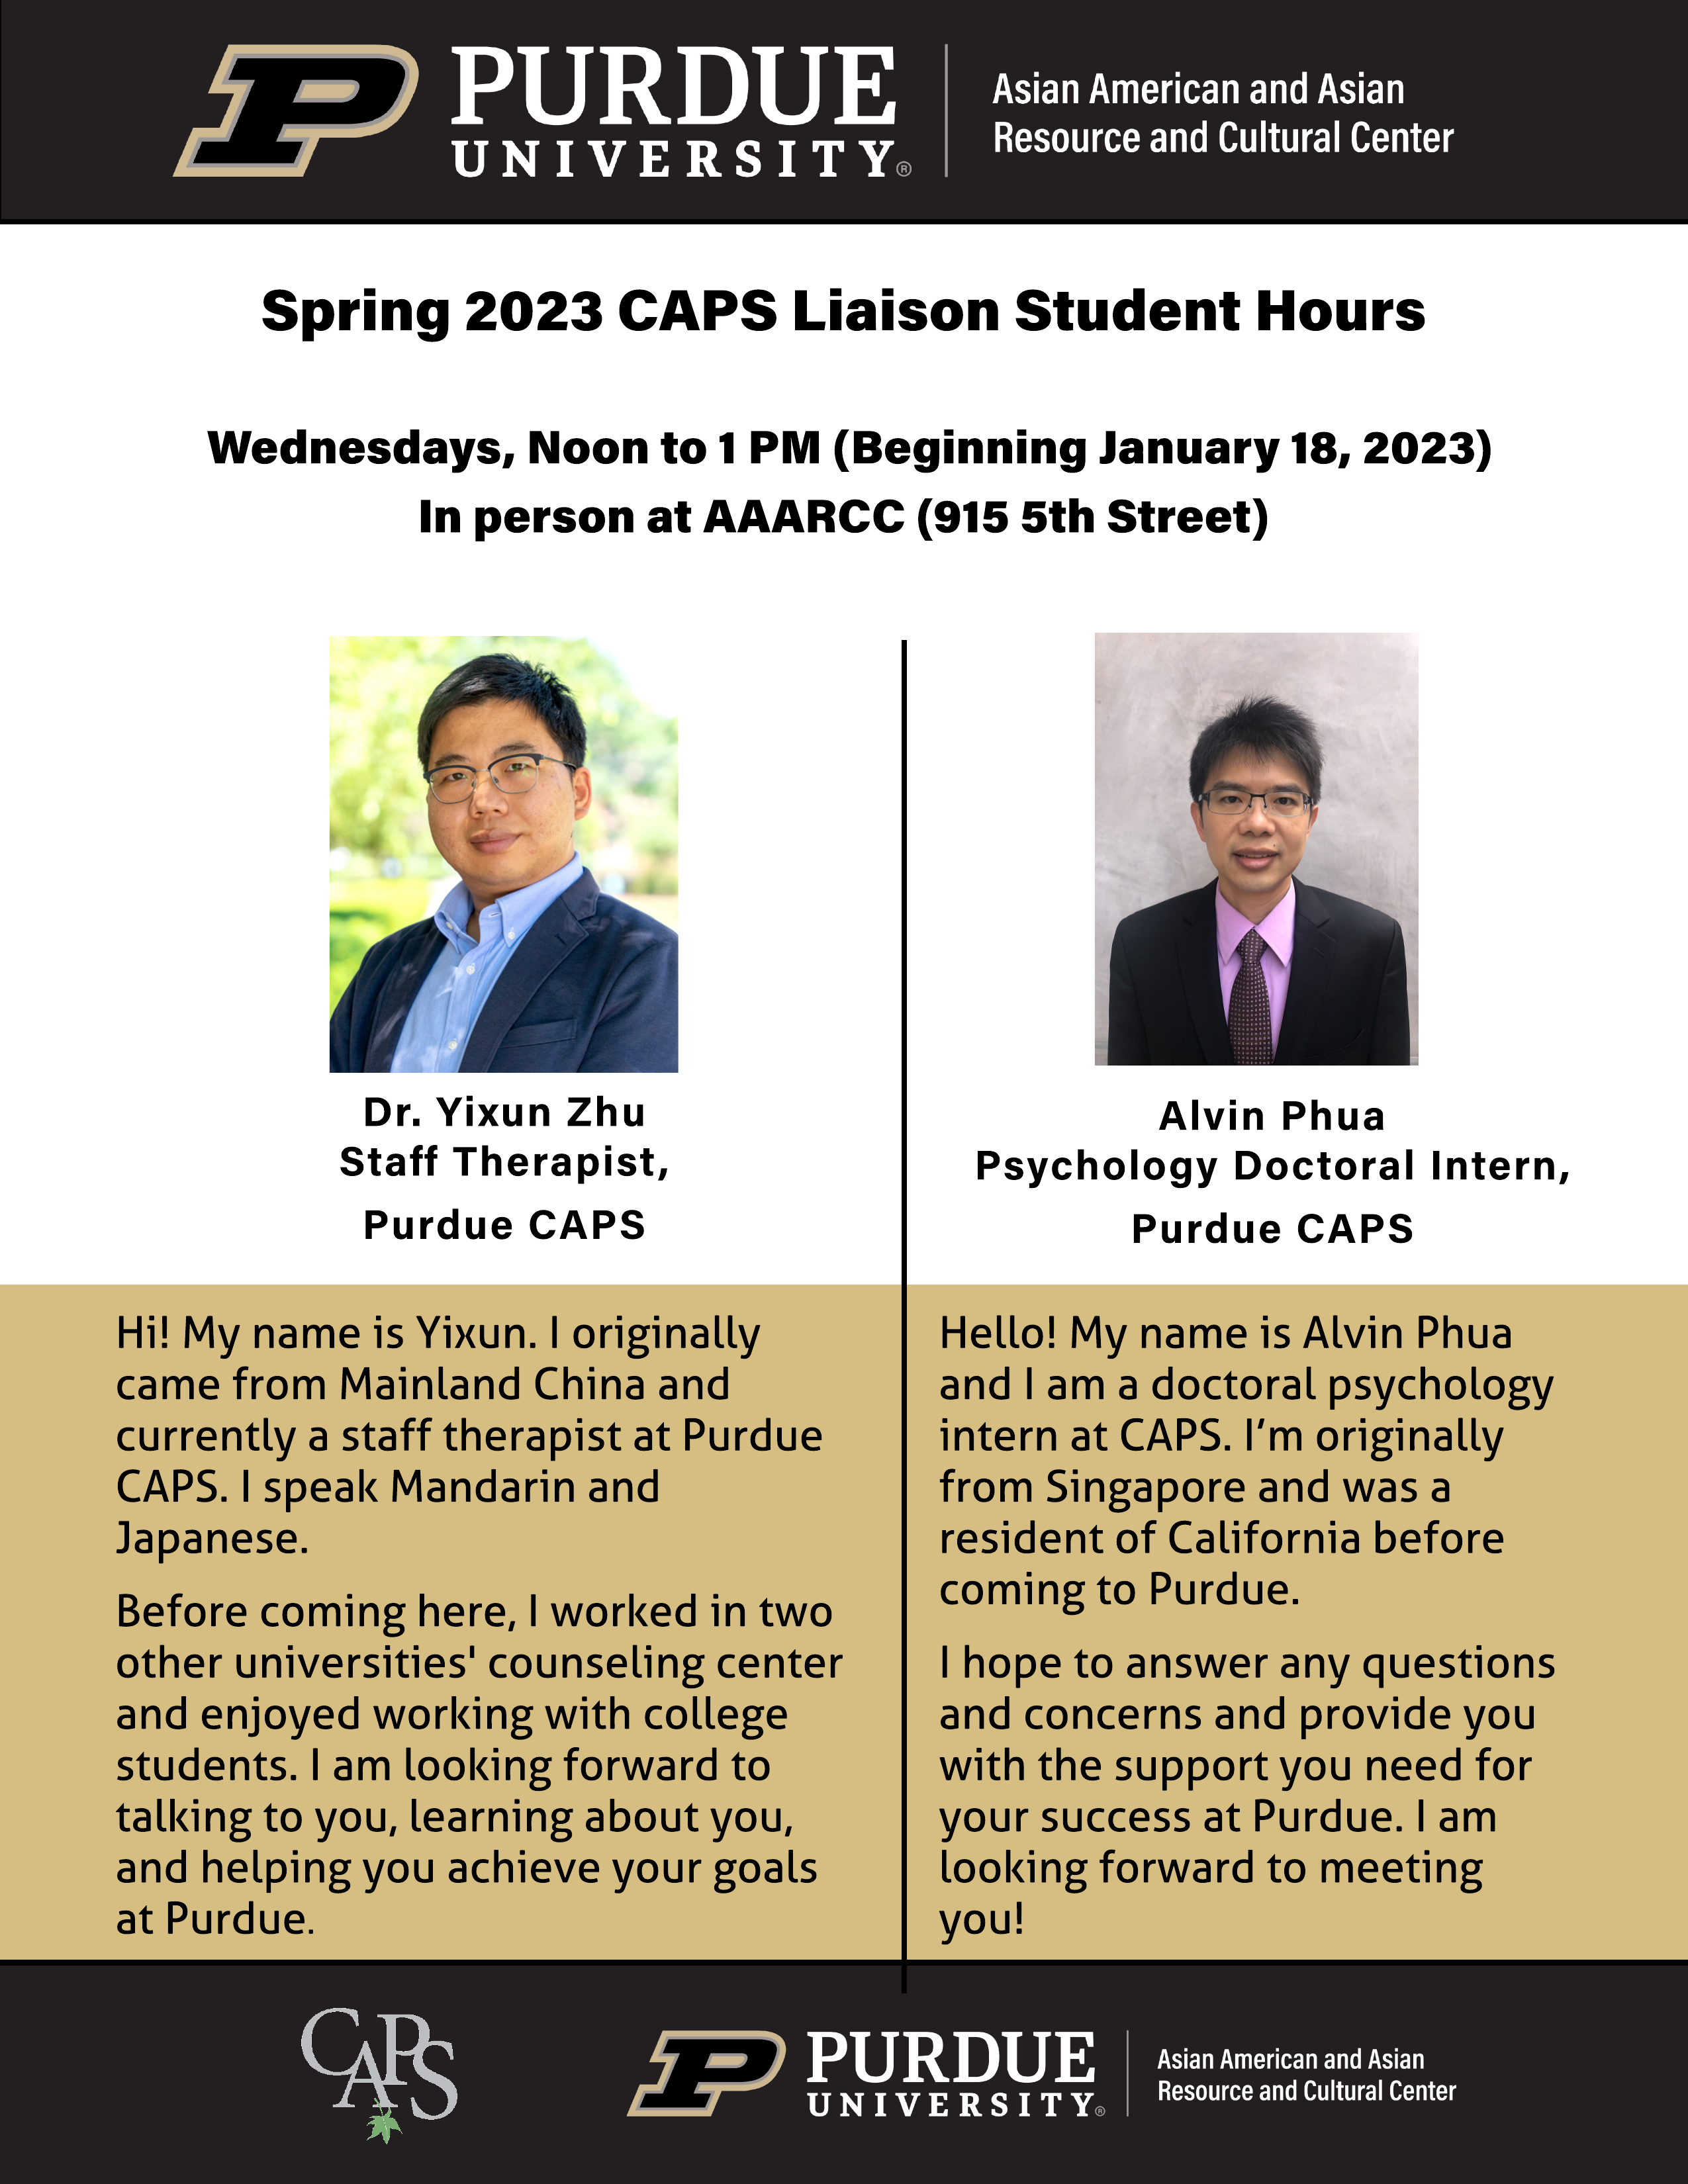 Reali-Tea Series: Purdue AAARCC & CAPS Spring 23 Date & Time: Wednesdays, 12:00 Noon - 1:00 PM ET Location: AAARCC (915 5th Street)  Conversations on mental health and well-being. Registration not required.